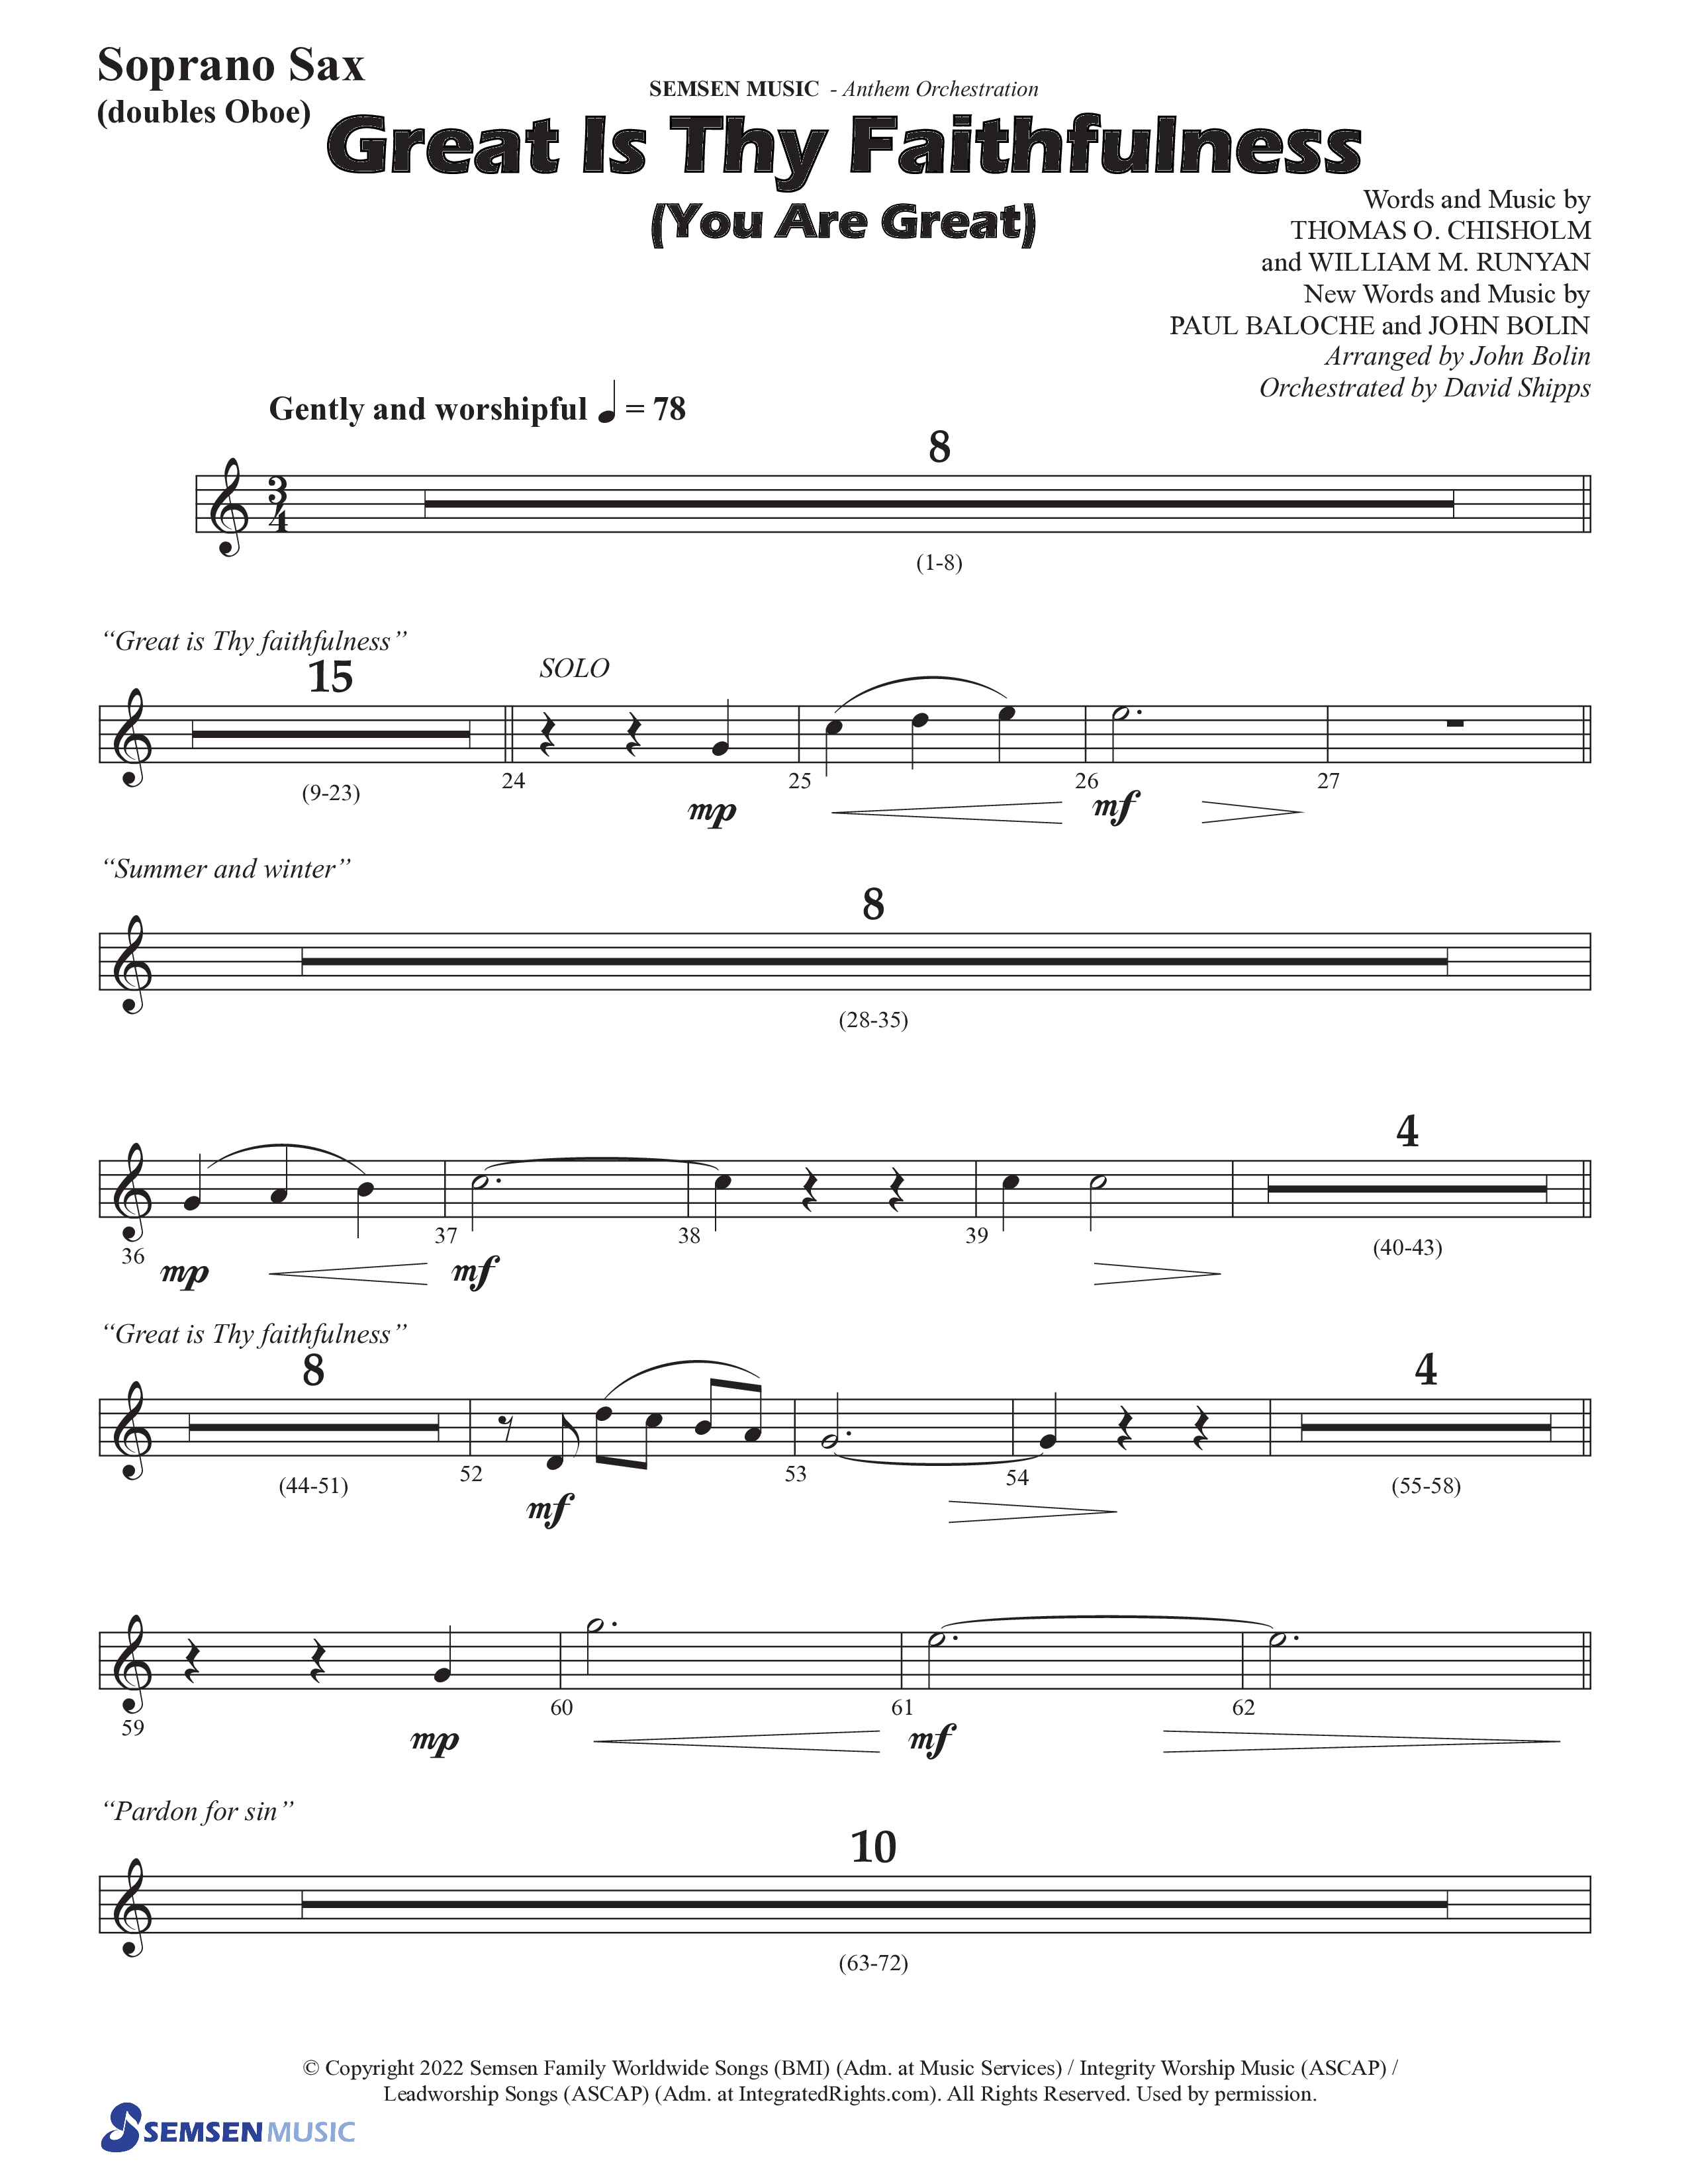 Great Is Thy Faithfulness (You Are Great) (Choral Anthem SATB) Soprano Sax (Semsen Music / Arr. John Bolin / Orch. David Shipps)